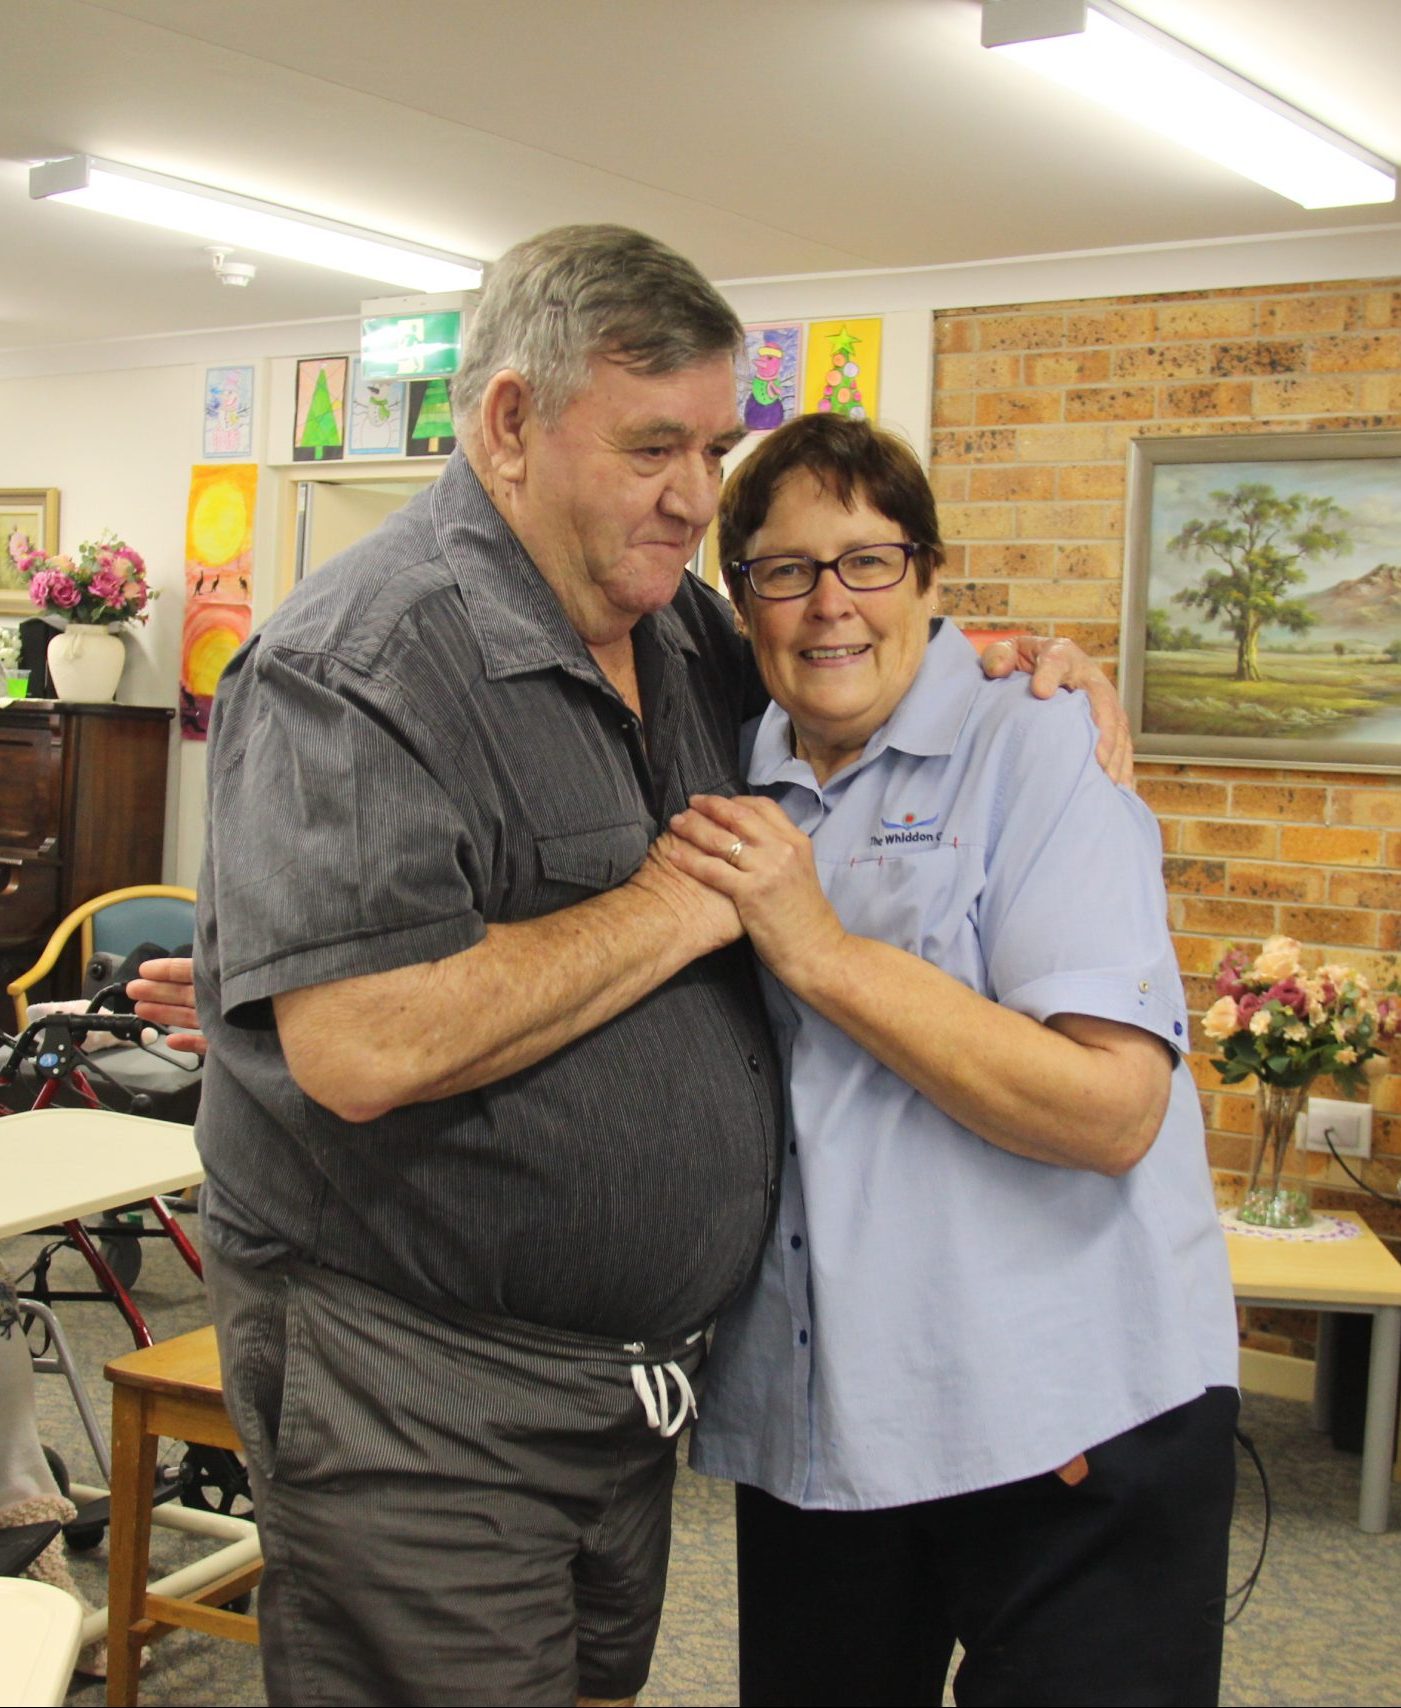 The Whiddon Group - Weeronga resident Leslie Collins and recreational activities officer Liz Berger dancing at an event in 2018.